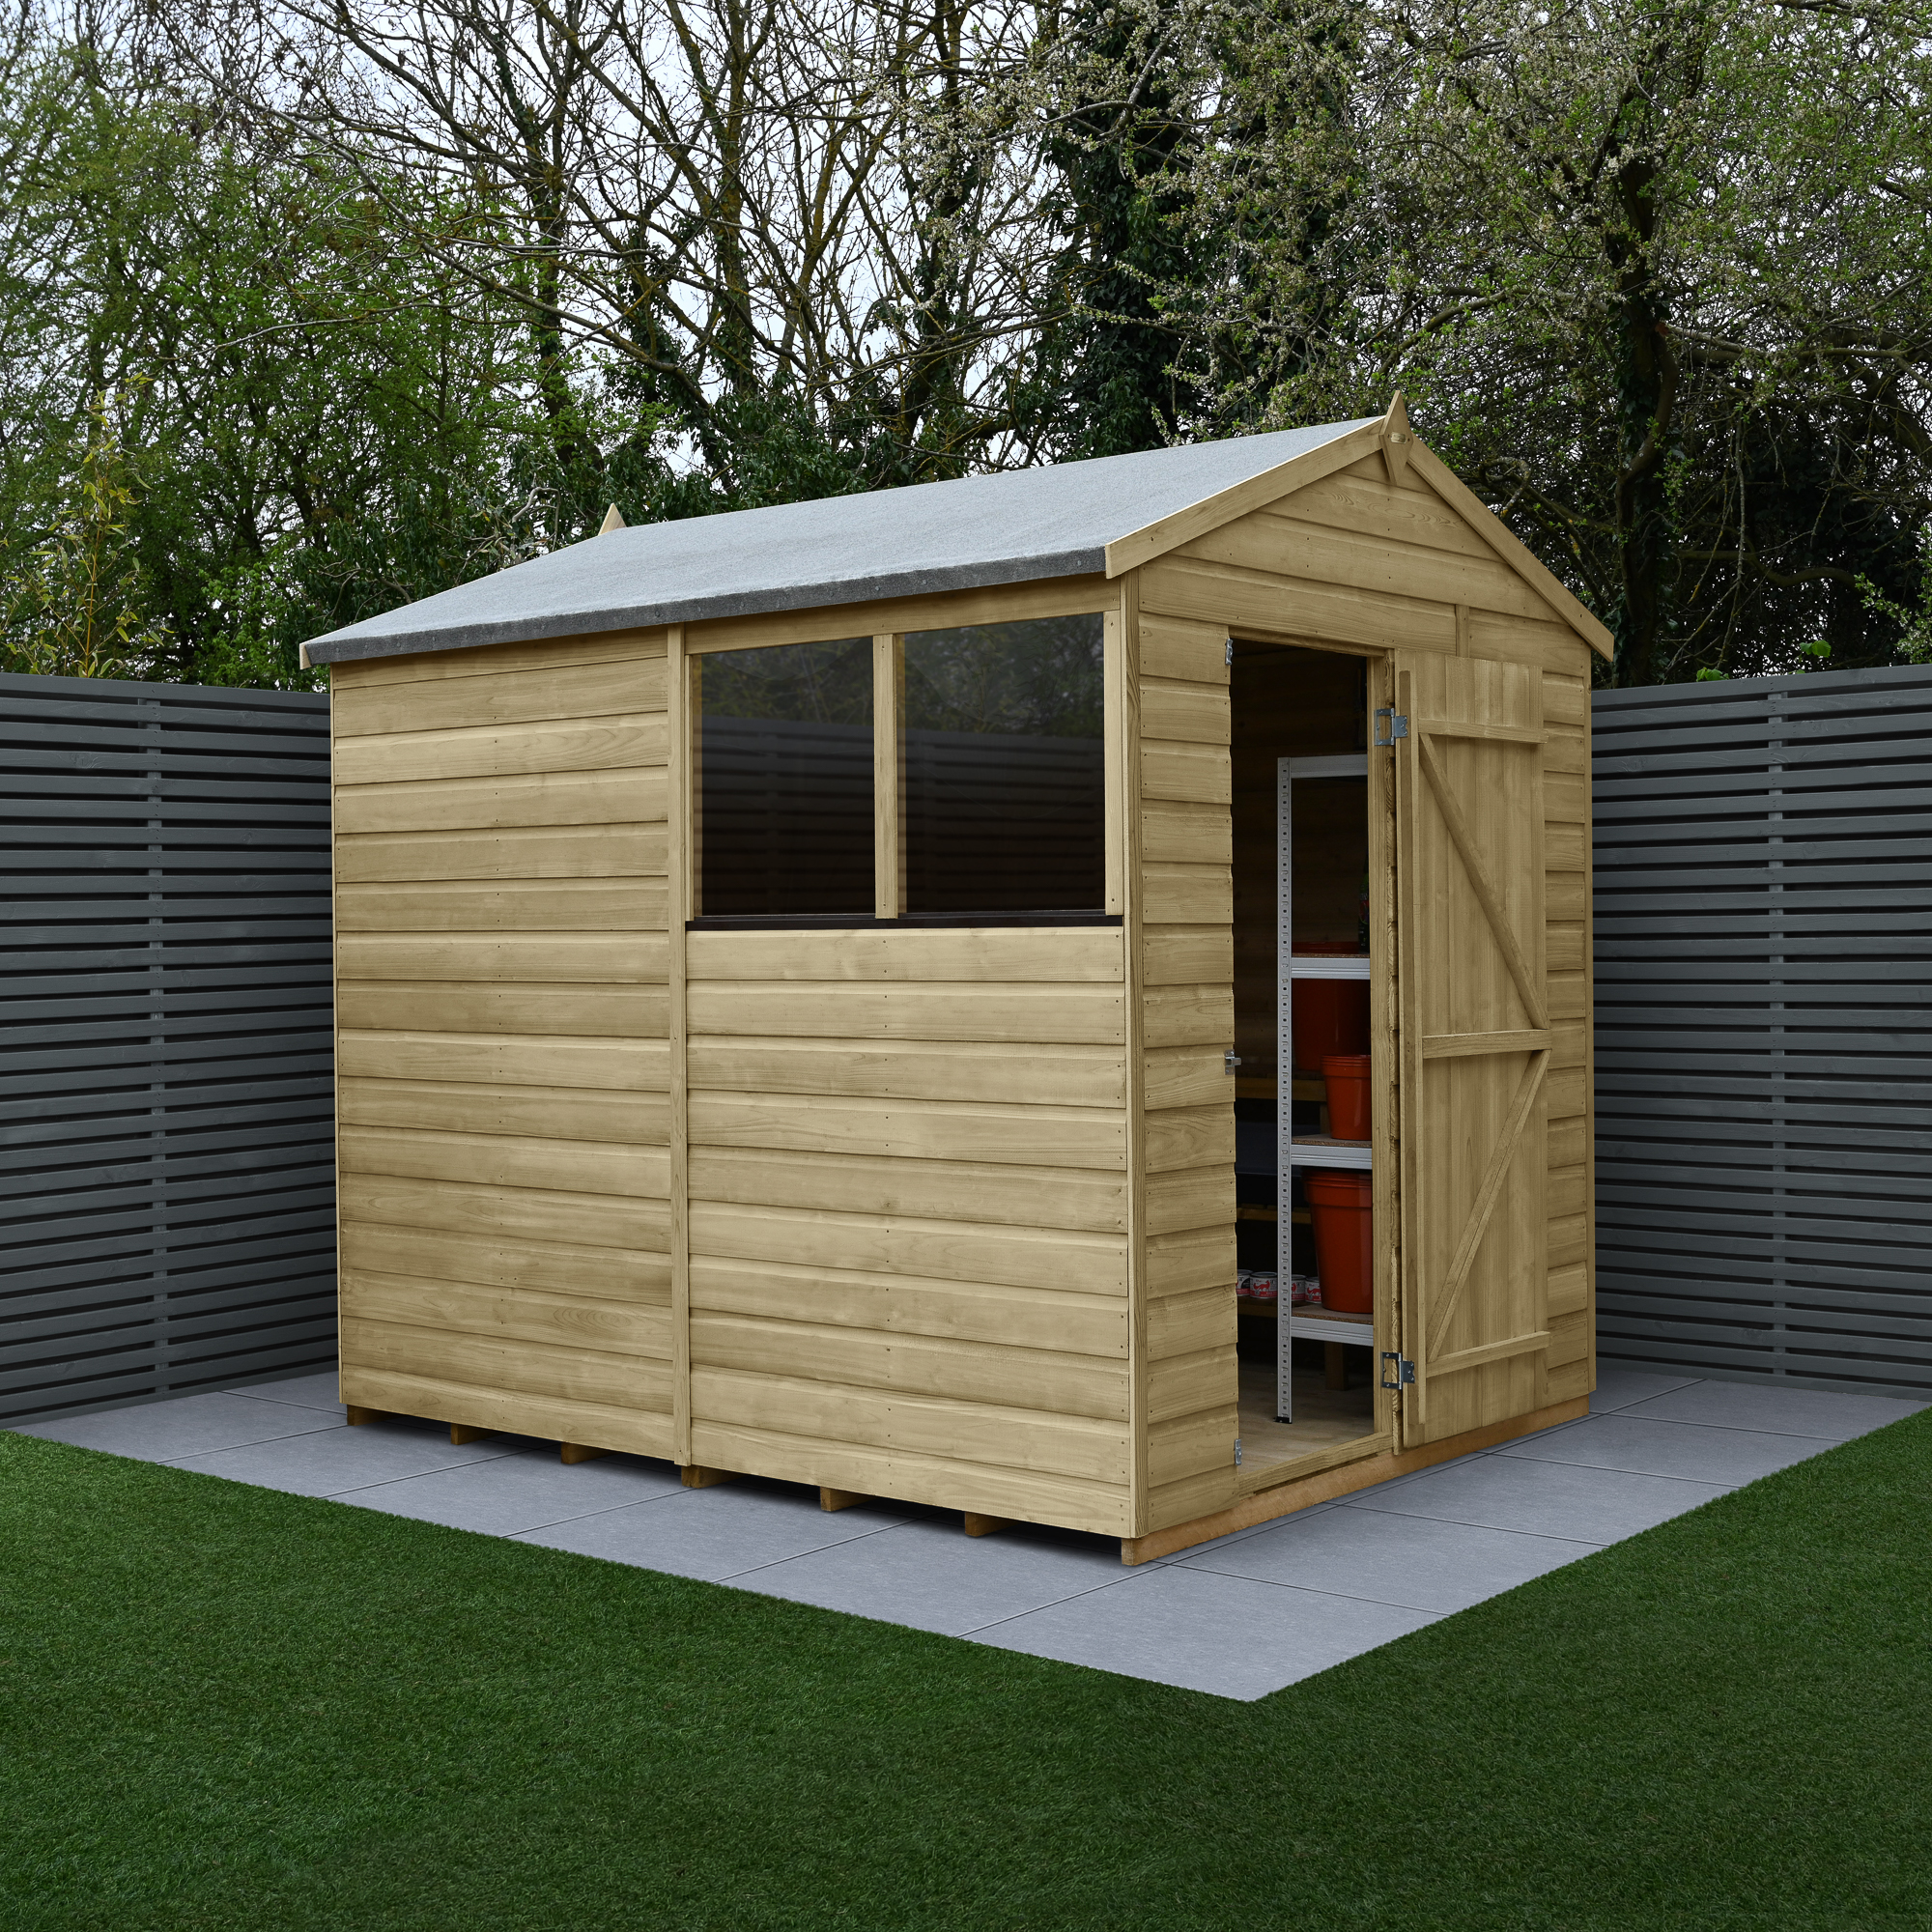 Forest Garden Beckwood 6 x 8ft Apex Shiplap Pressure Treated Shed